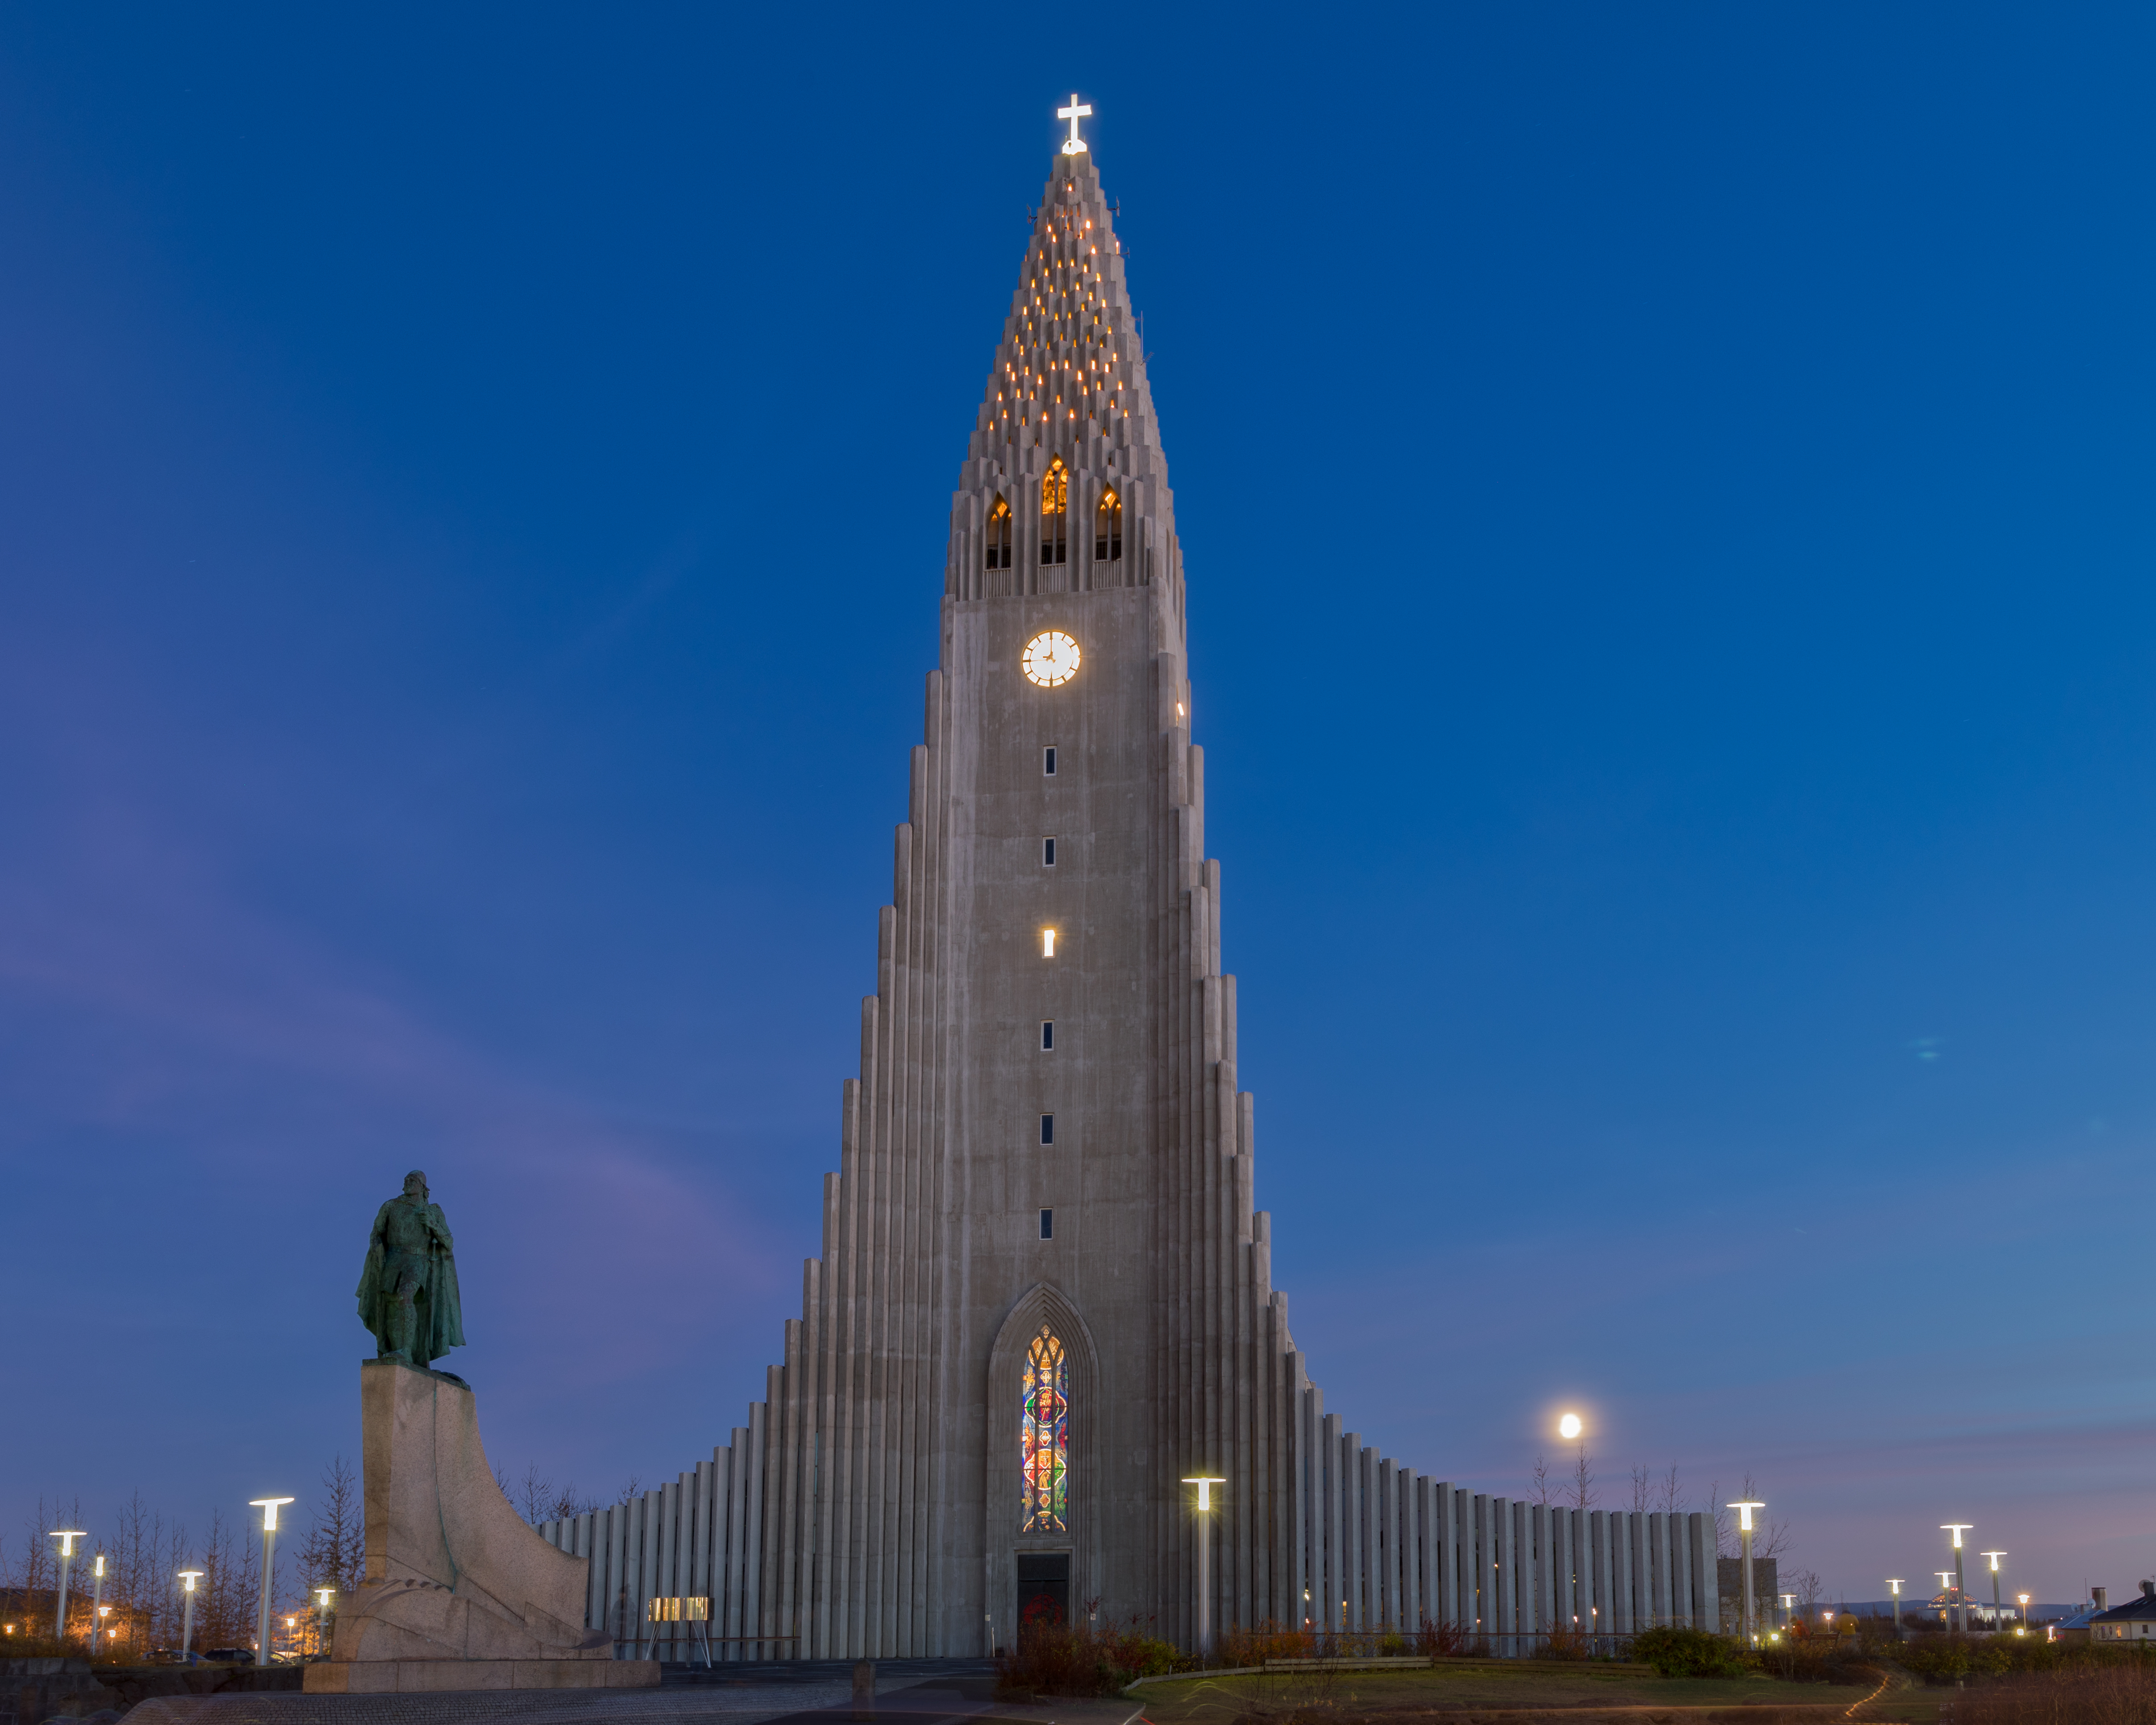 Hallgrímskirkja or the church of Hallgrimur, is a Lurtheran Church in Reykjavik, Iceland. The church is the tallest building in Icelnad.